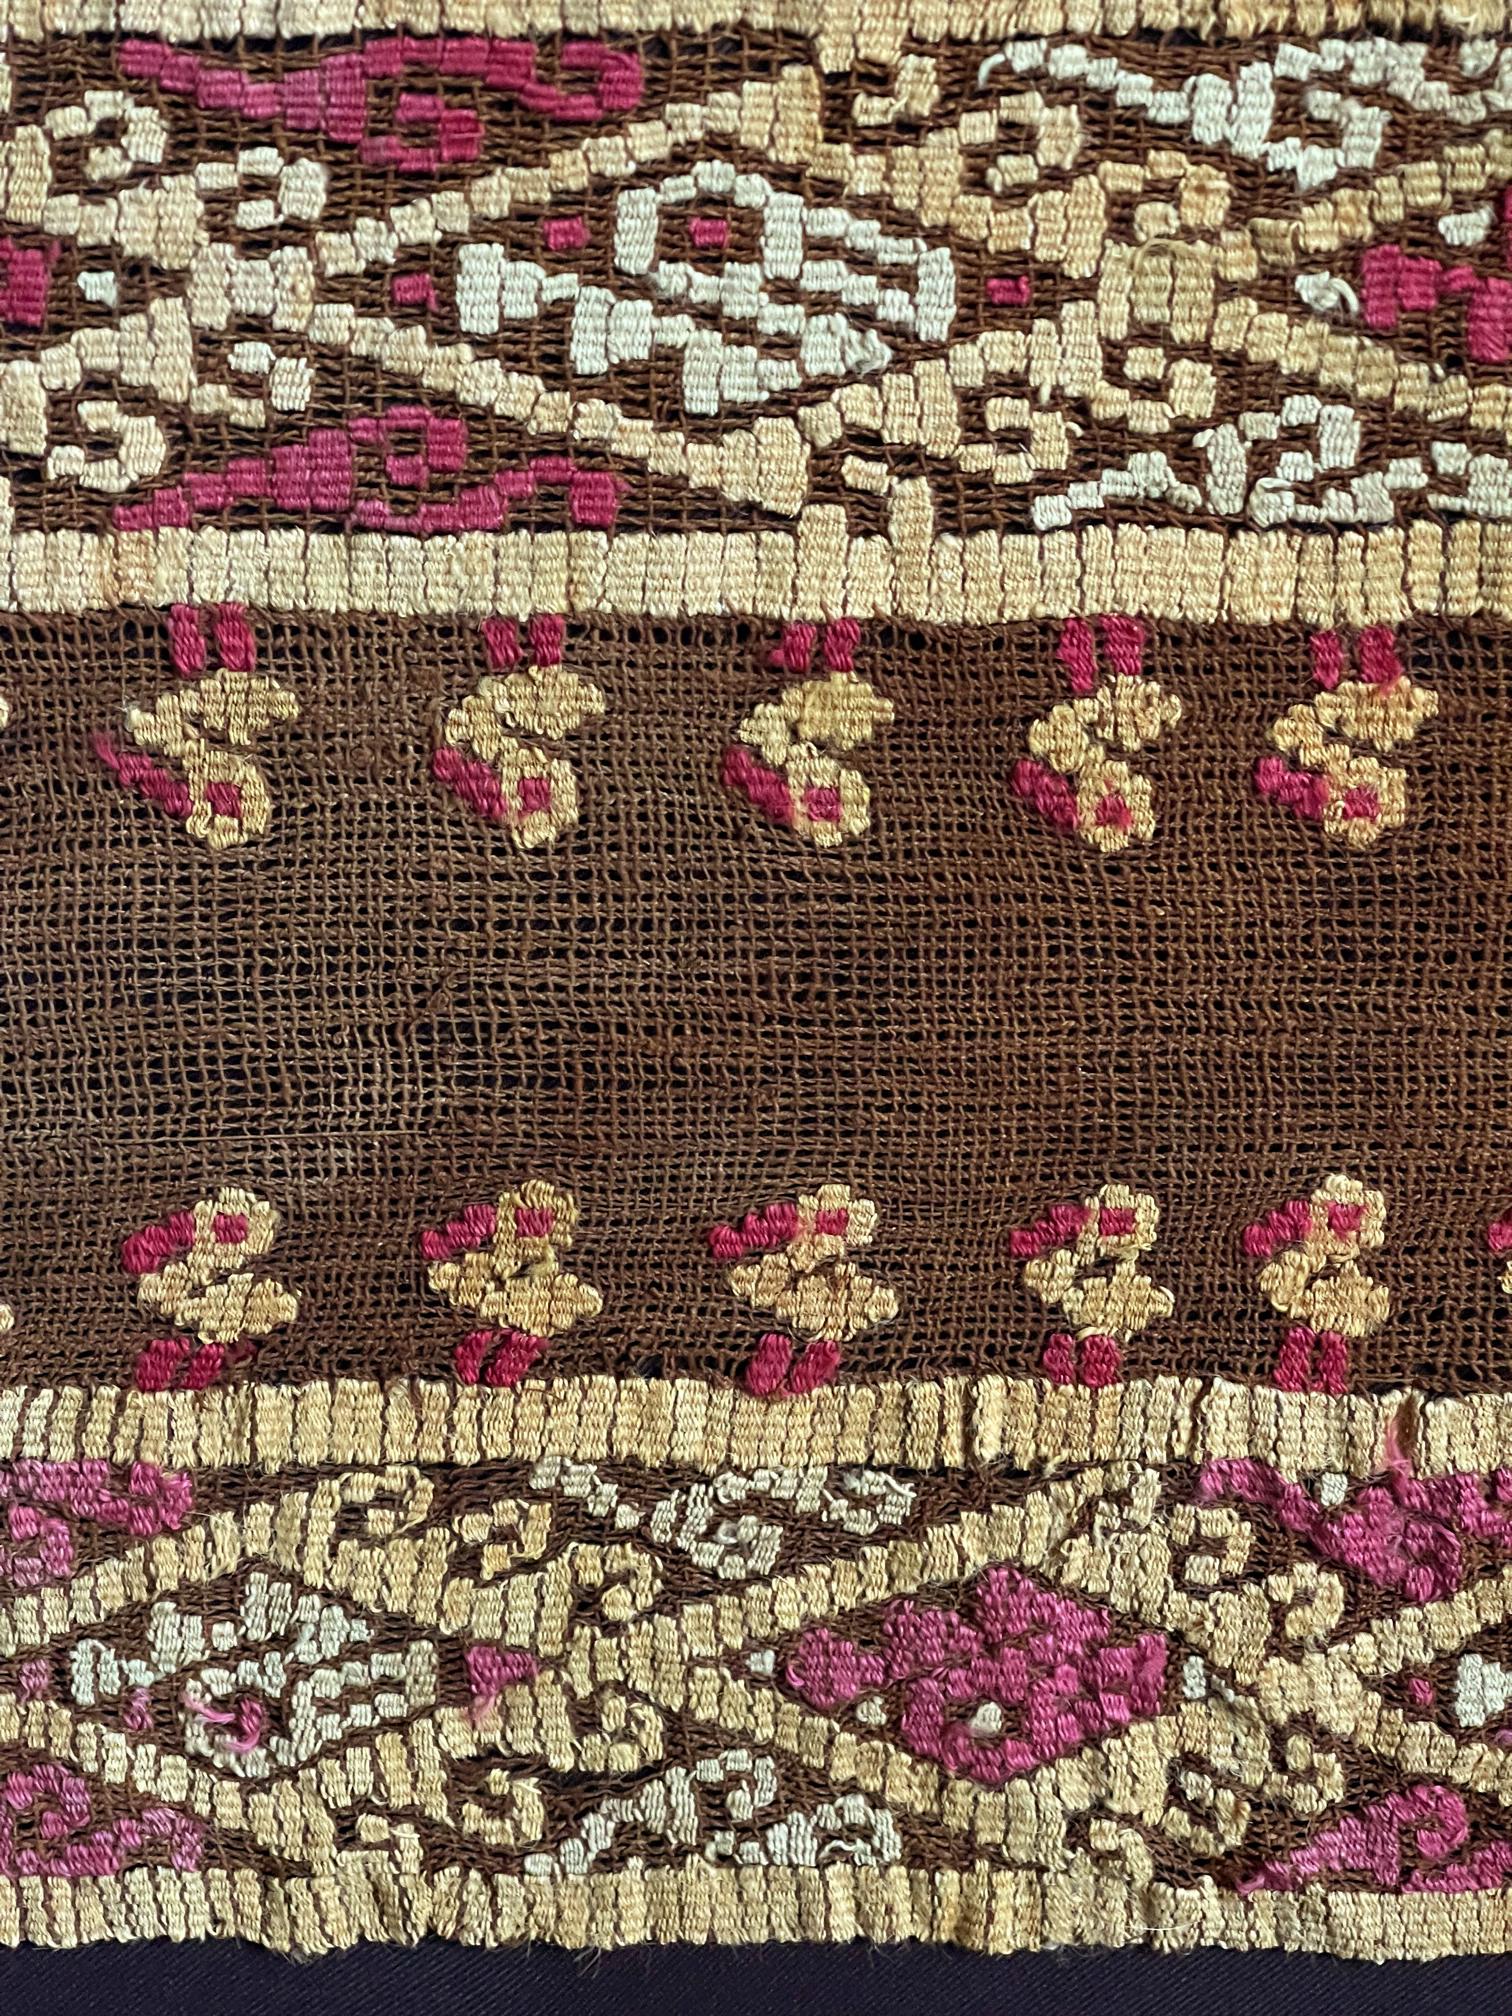 Framed Pre-Columbian Woven Textile from Chancay Culture For Sale 2